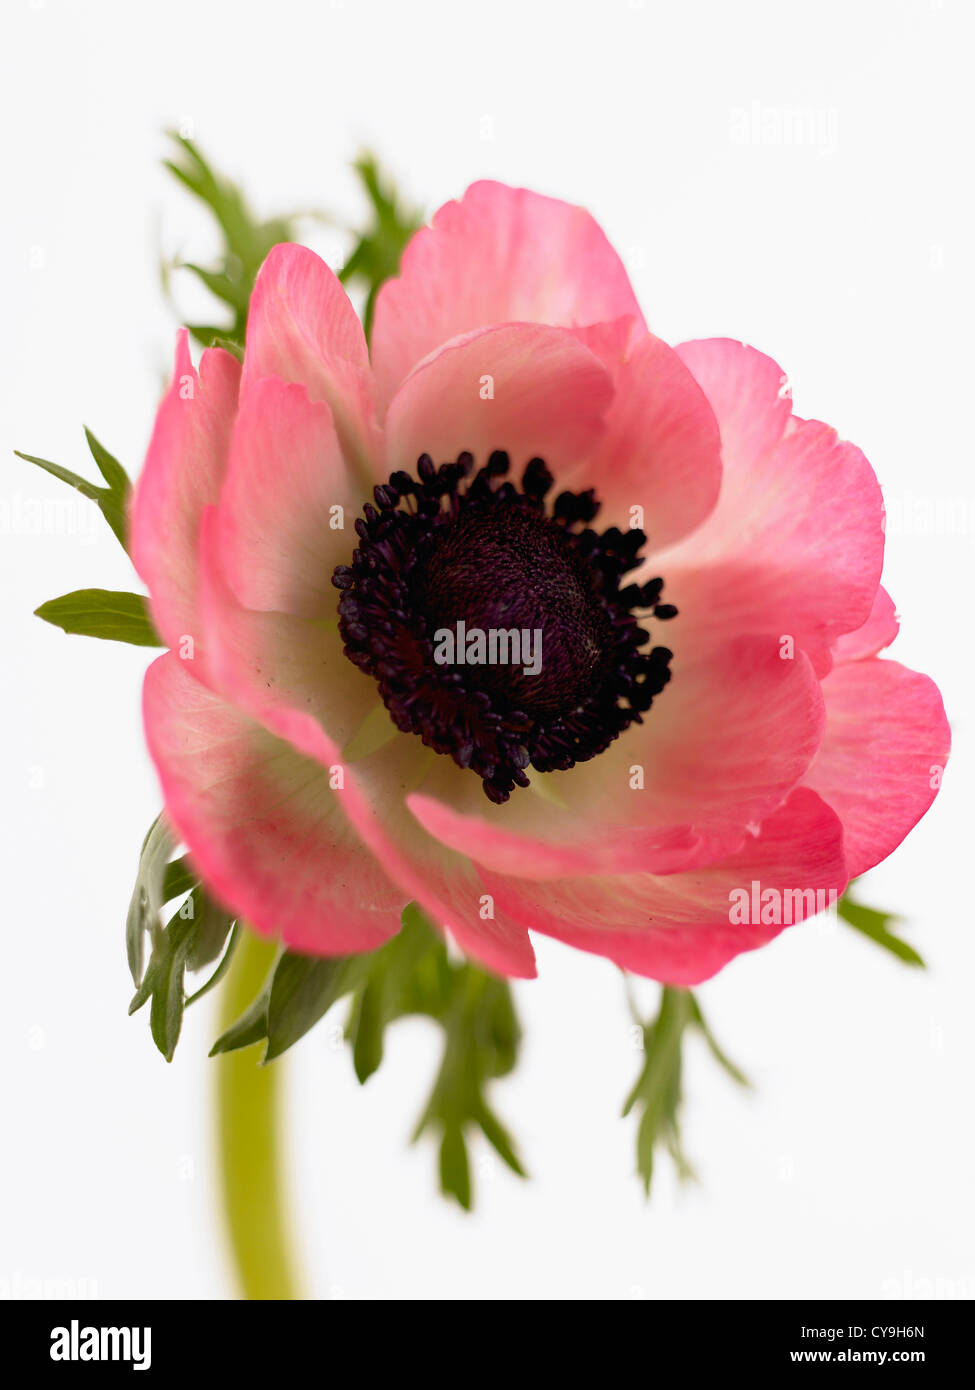 Anemone coronaria, Garden anemone, Single open pink flower on a stem against a white background. Stock Photo